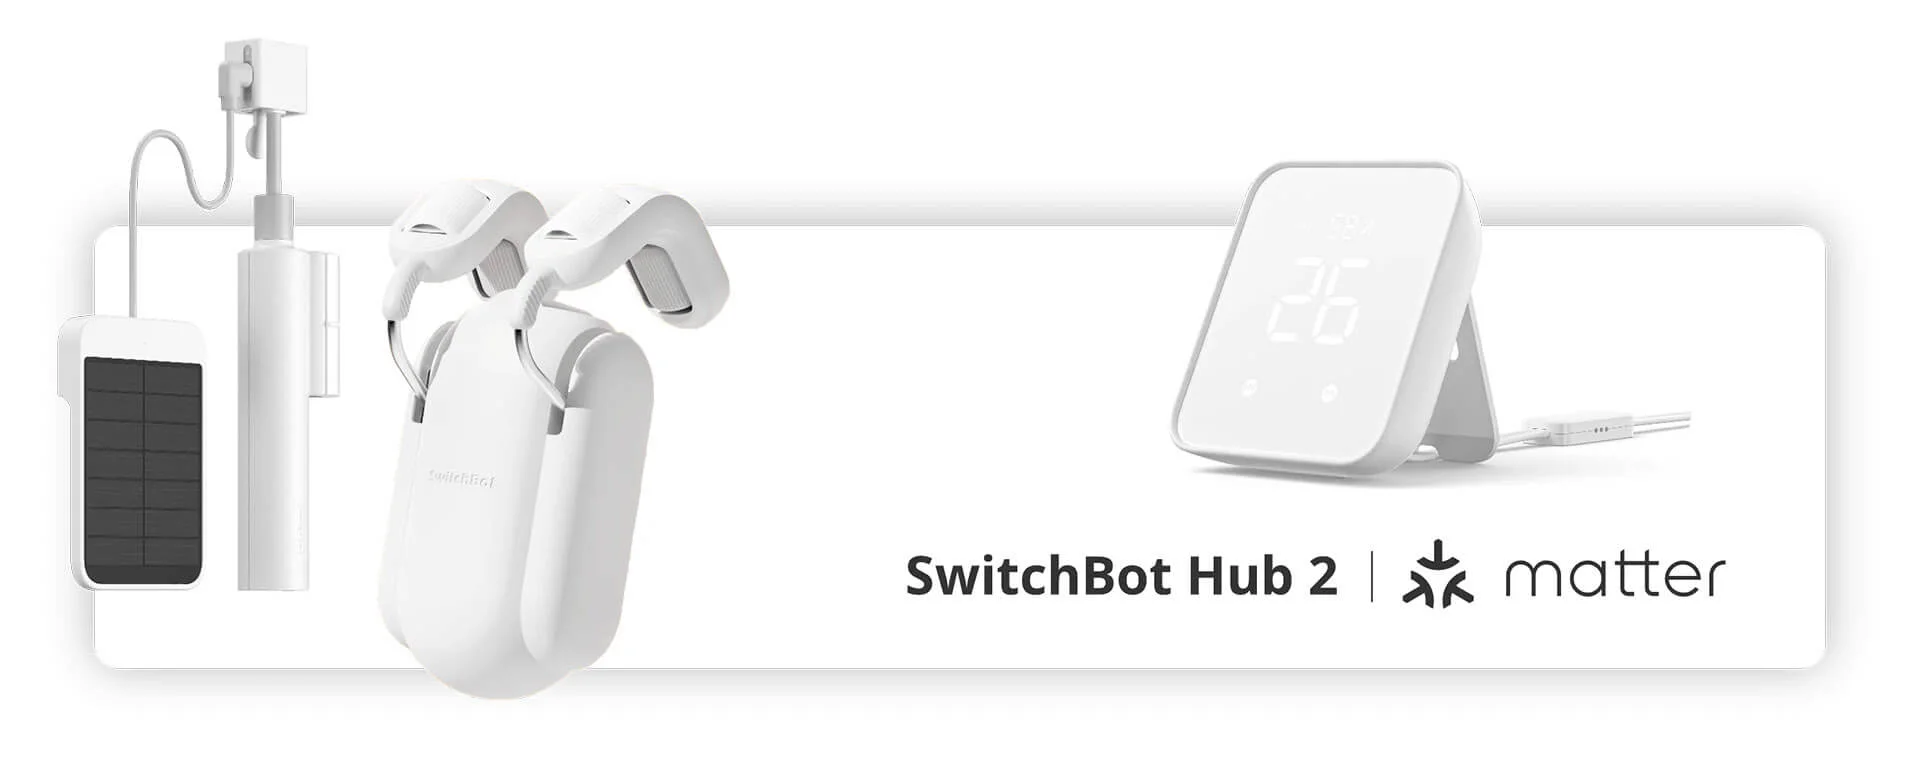 SwitchBot Bot: How to use the Bot as a push-button in Apple Home